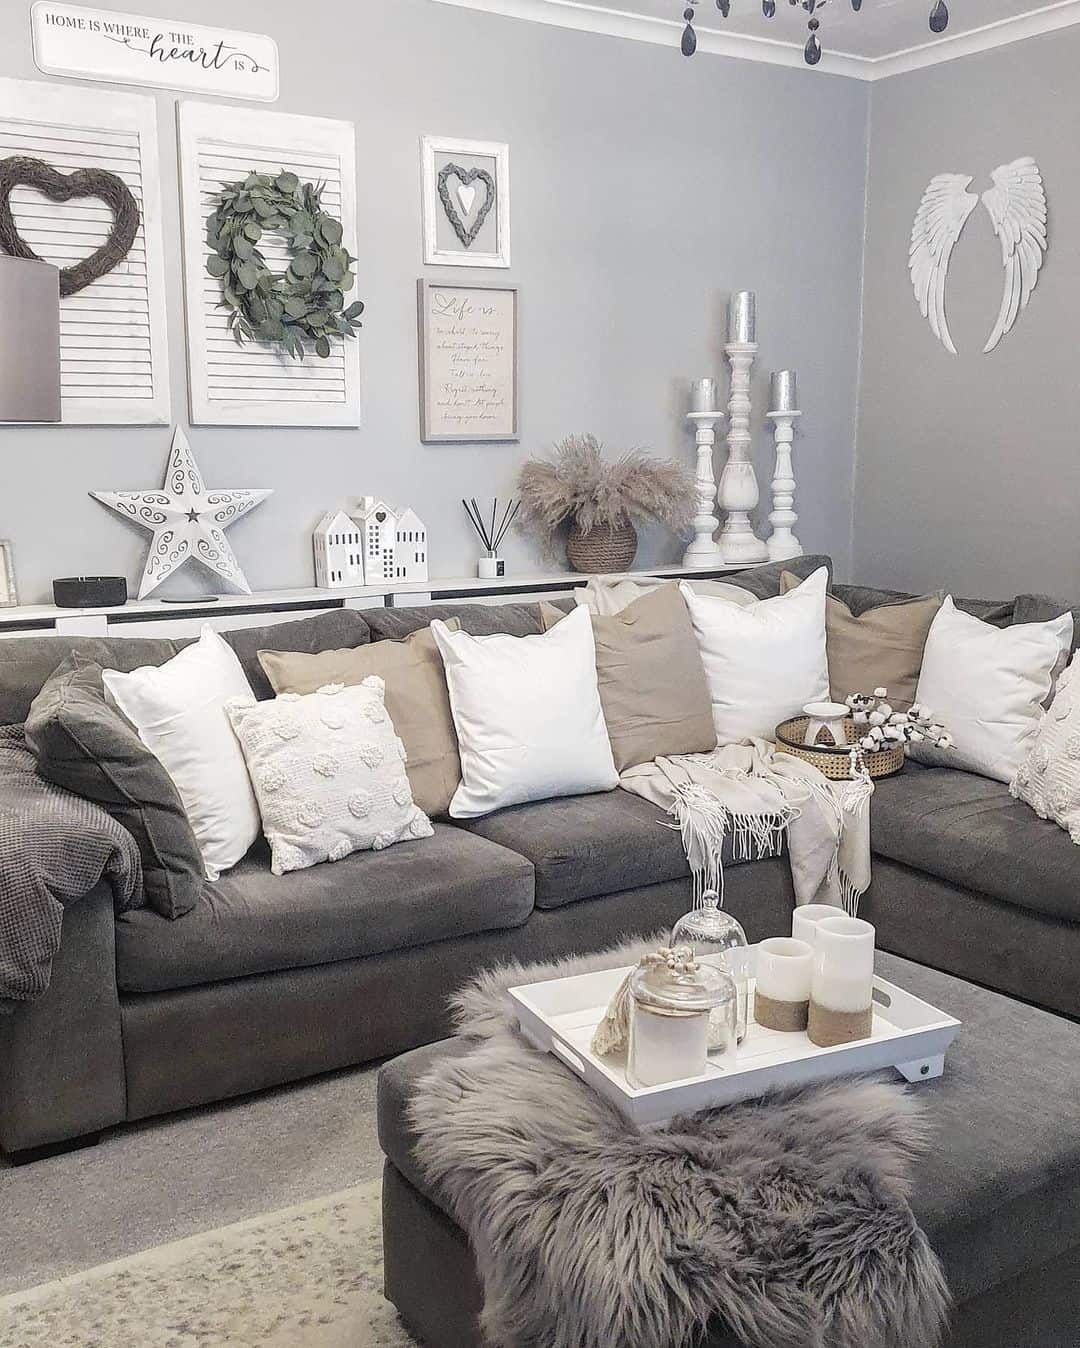 Chic Monochrome Living Room With Gray and White Elements - Soul & Lane